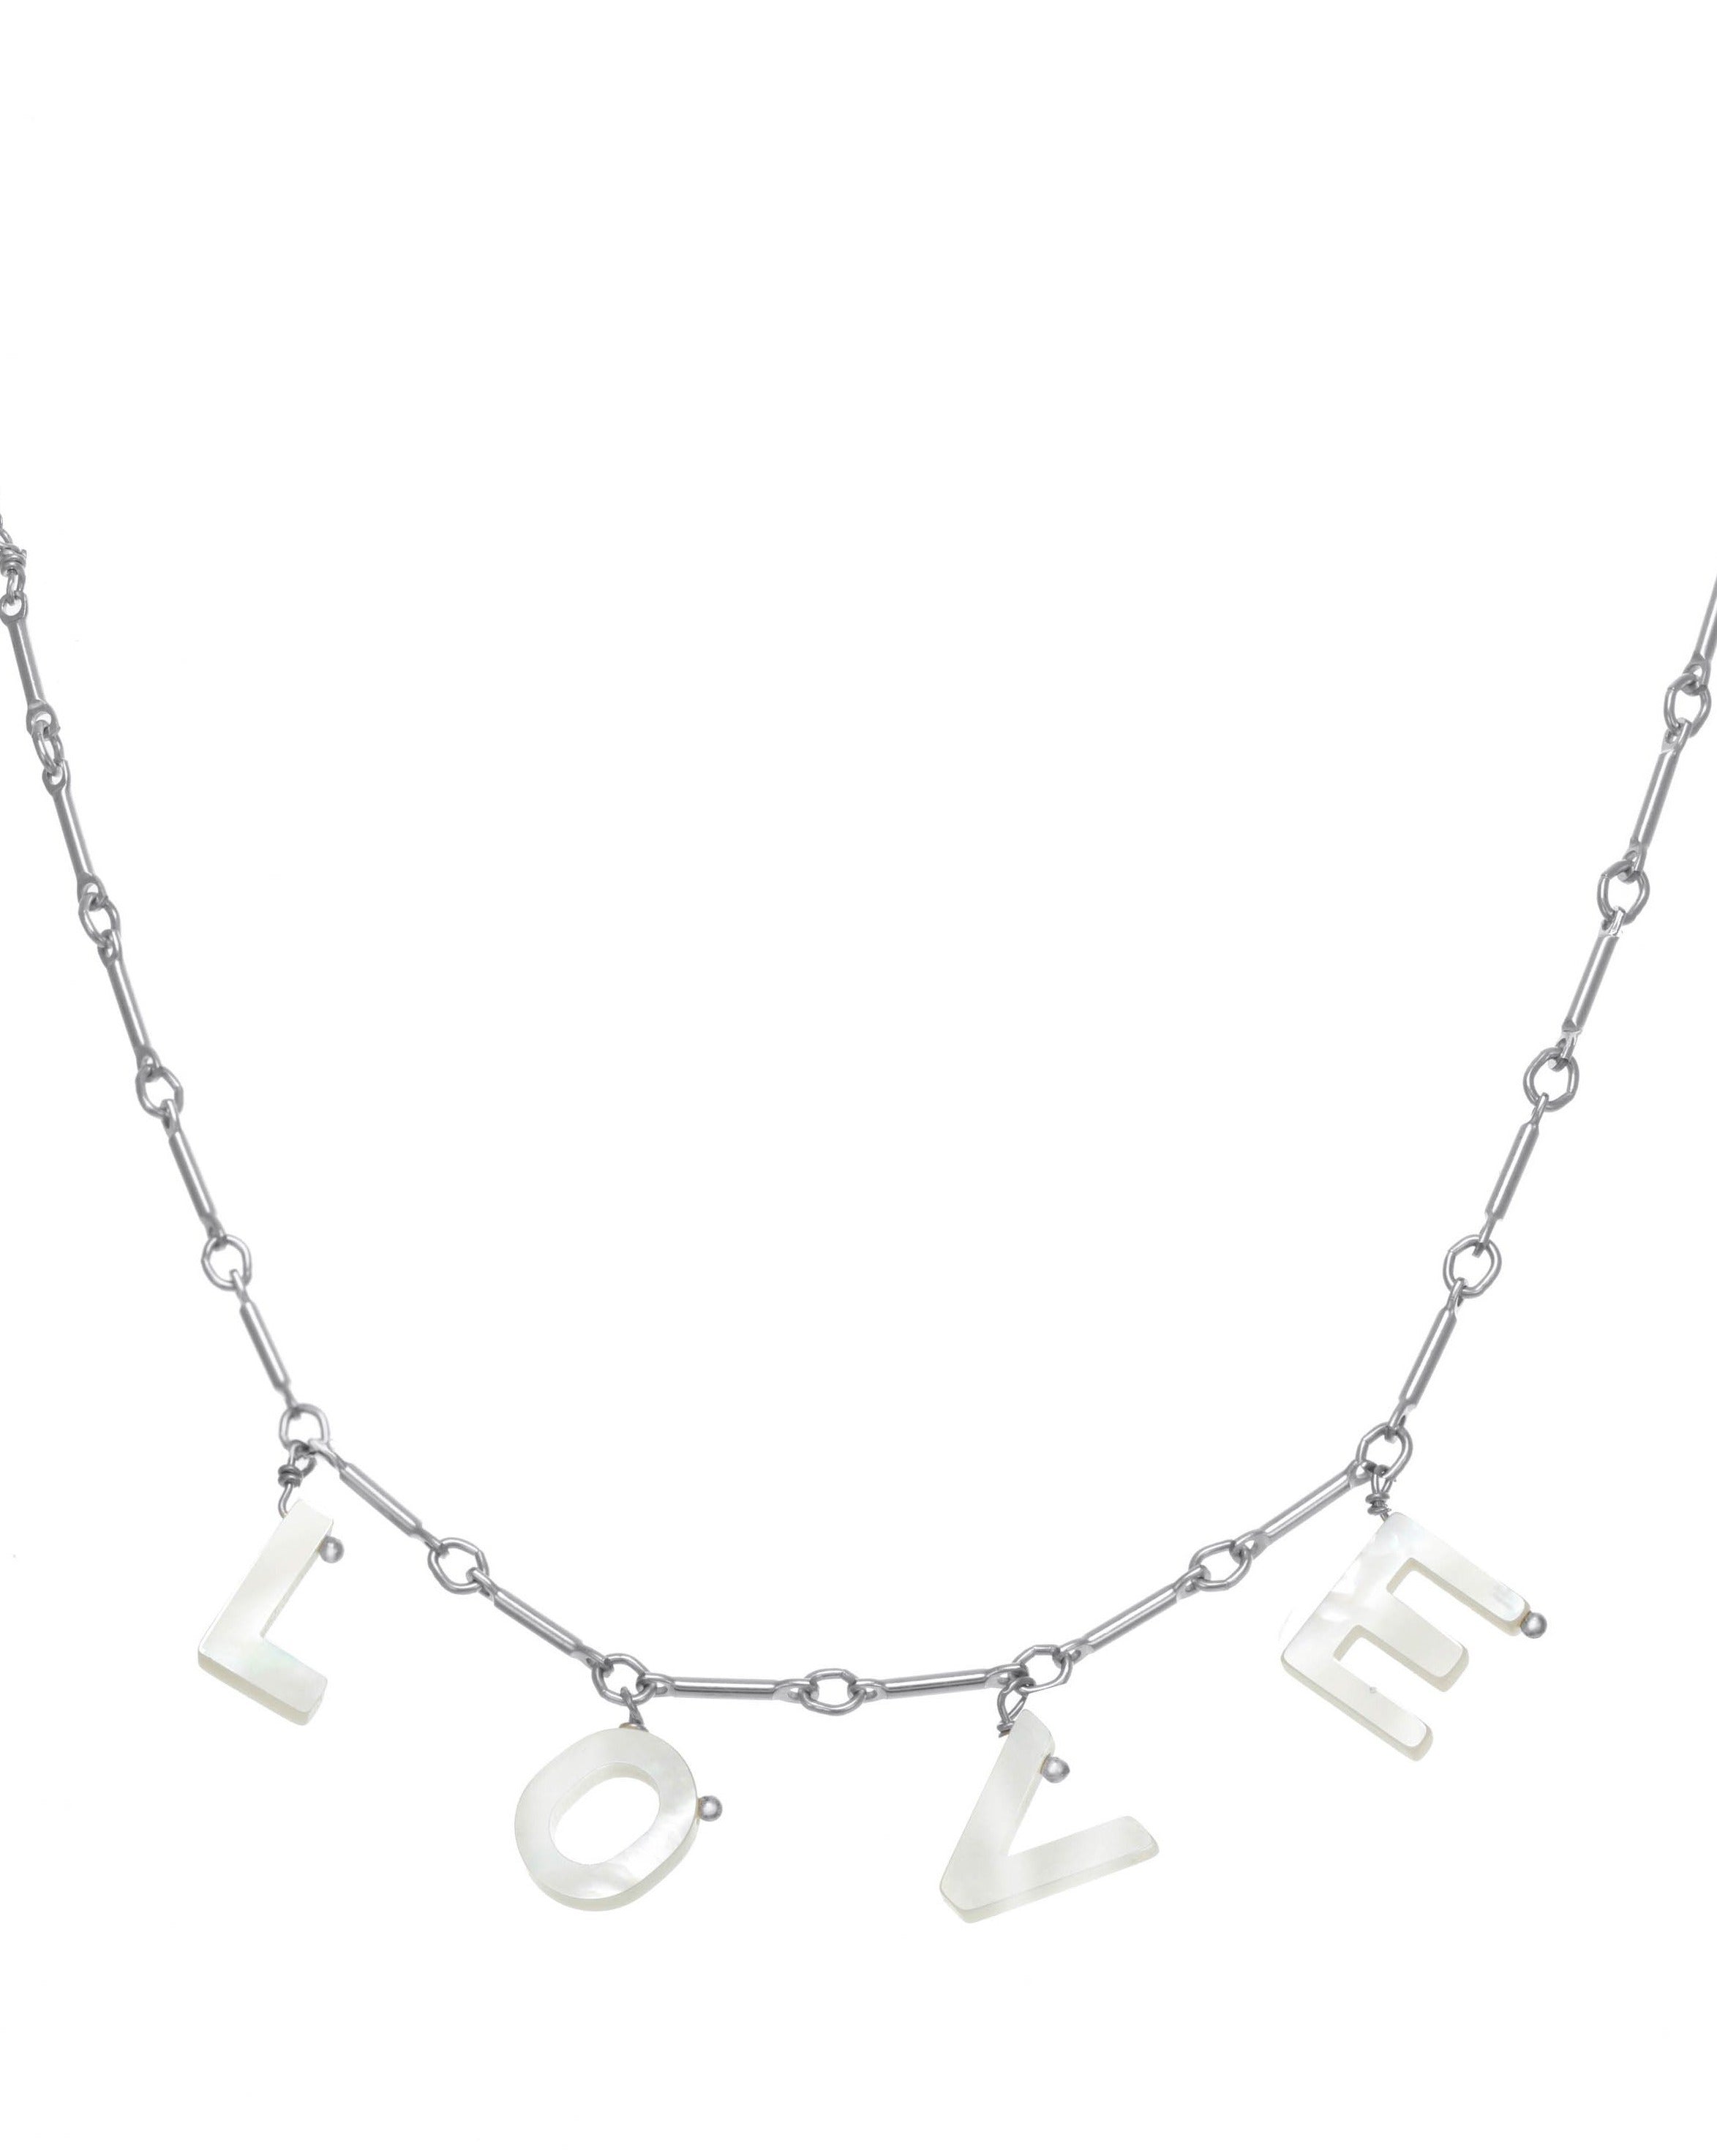 Love Necklace by KOZAKH. A 16 to 18 inch adjustable length necklace with linked bar chain on bottom half and flat link chain on top half, crafted in Sterling Silver, featuring a customizable word made from hand carved Mother of Pearl letters.